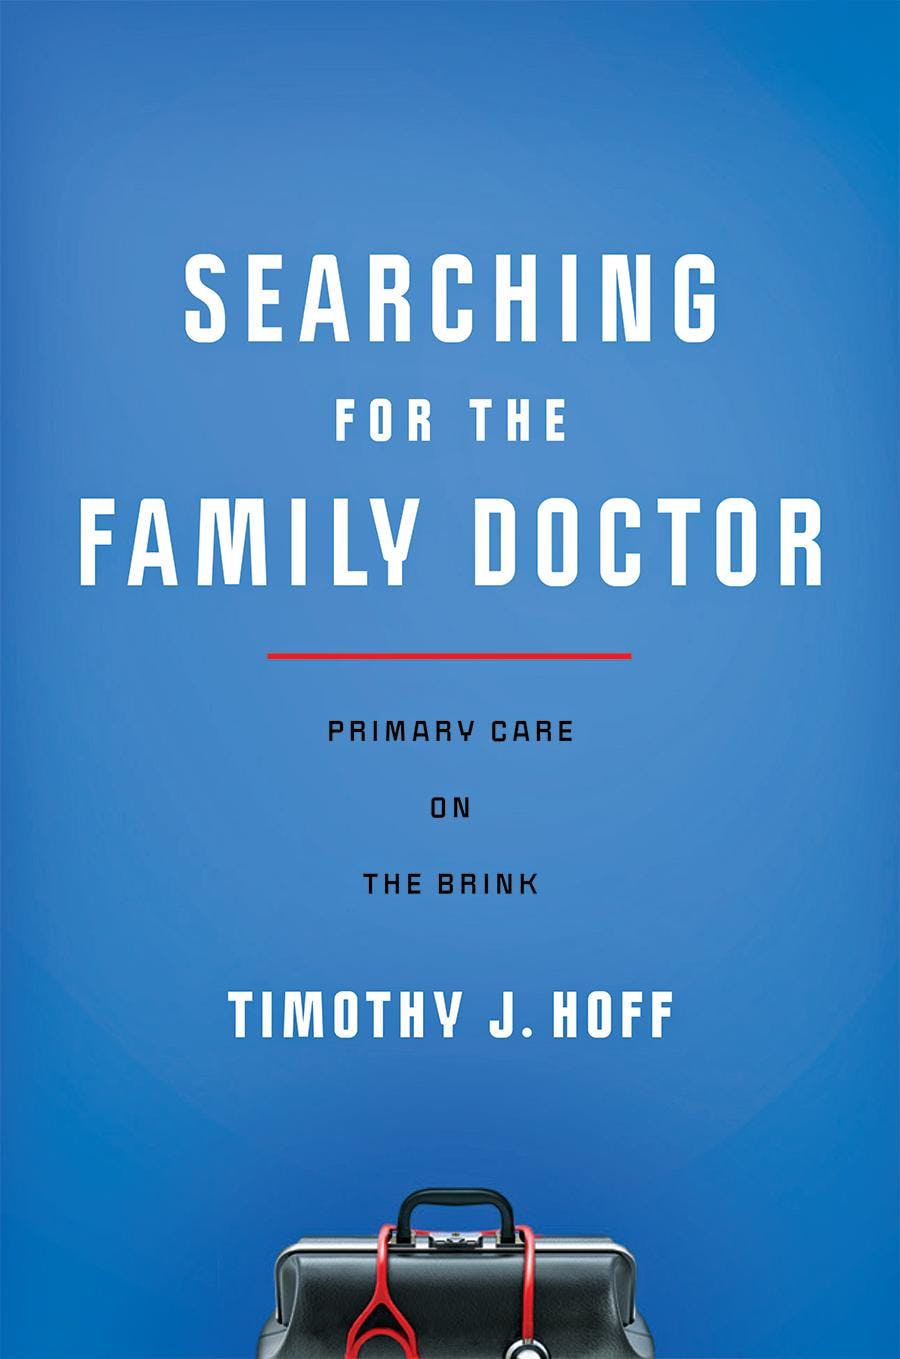 Family physicians versus the health system